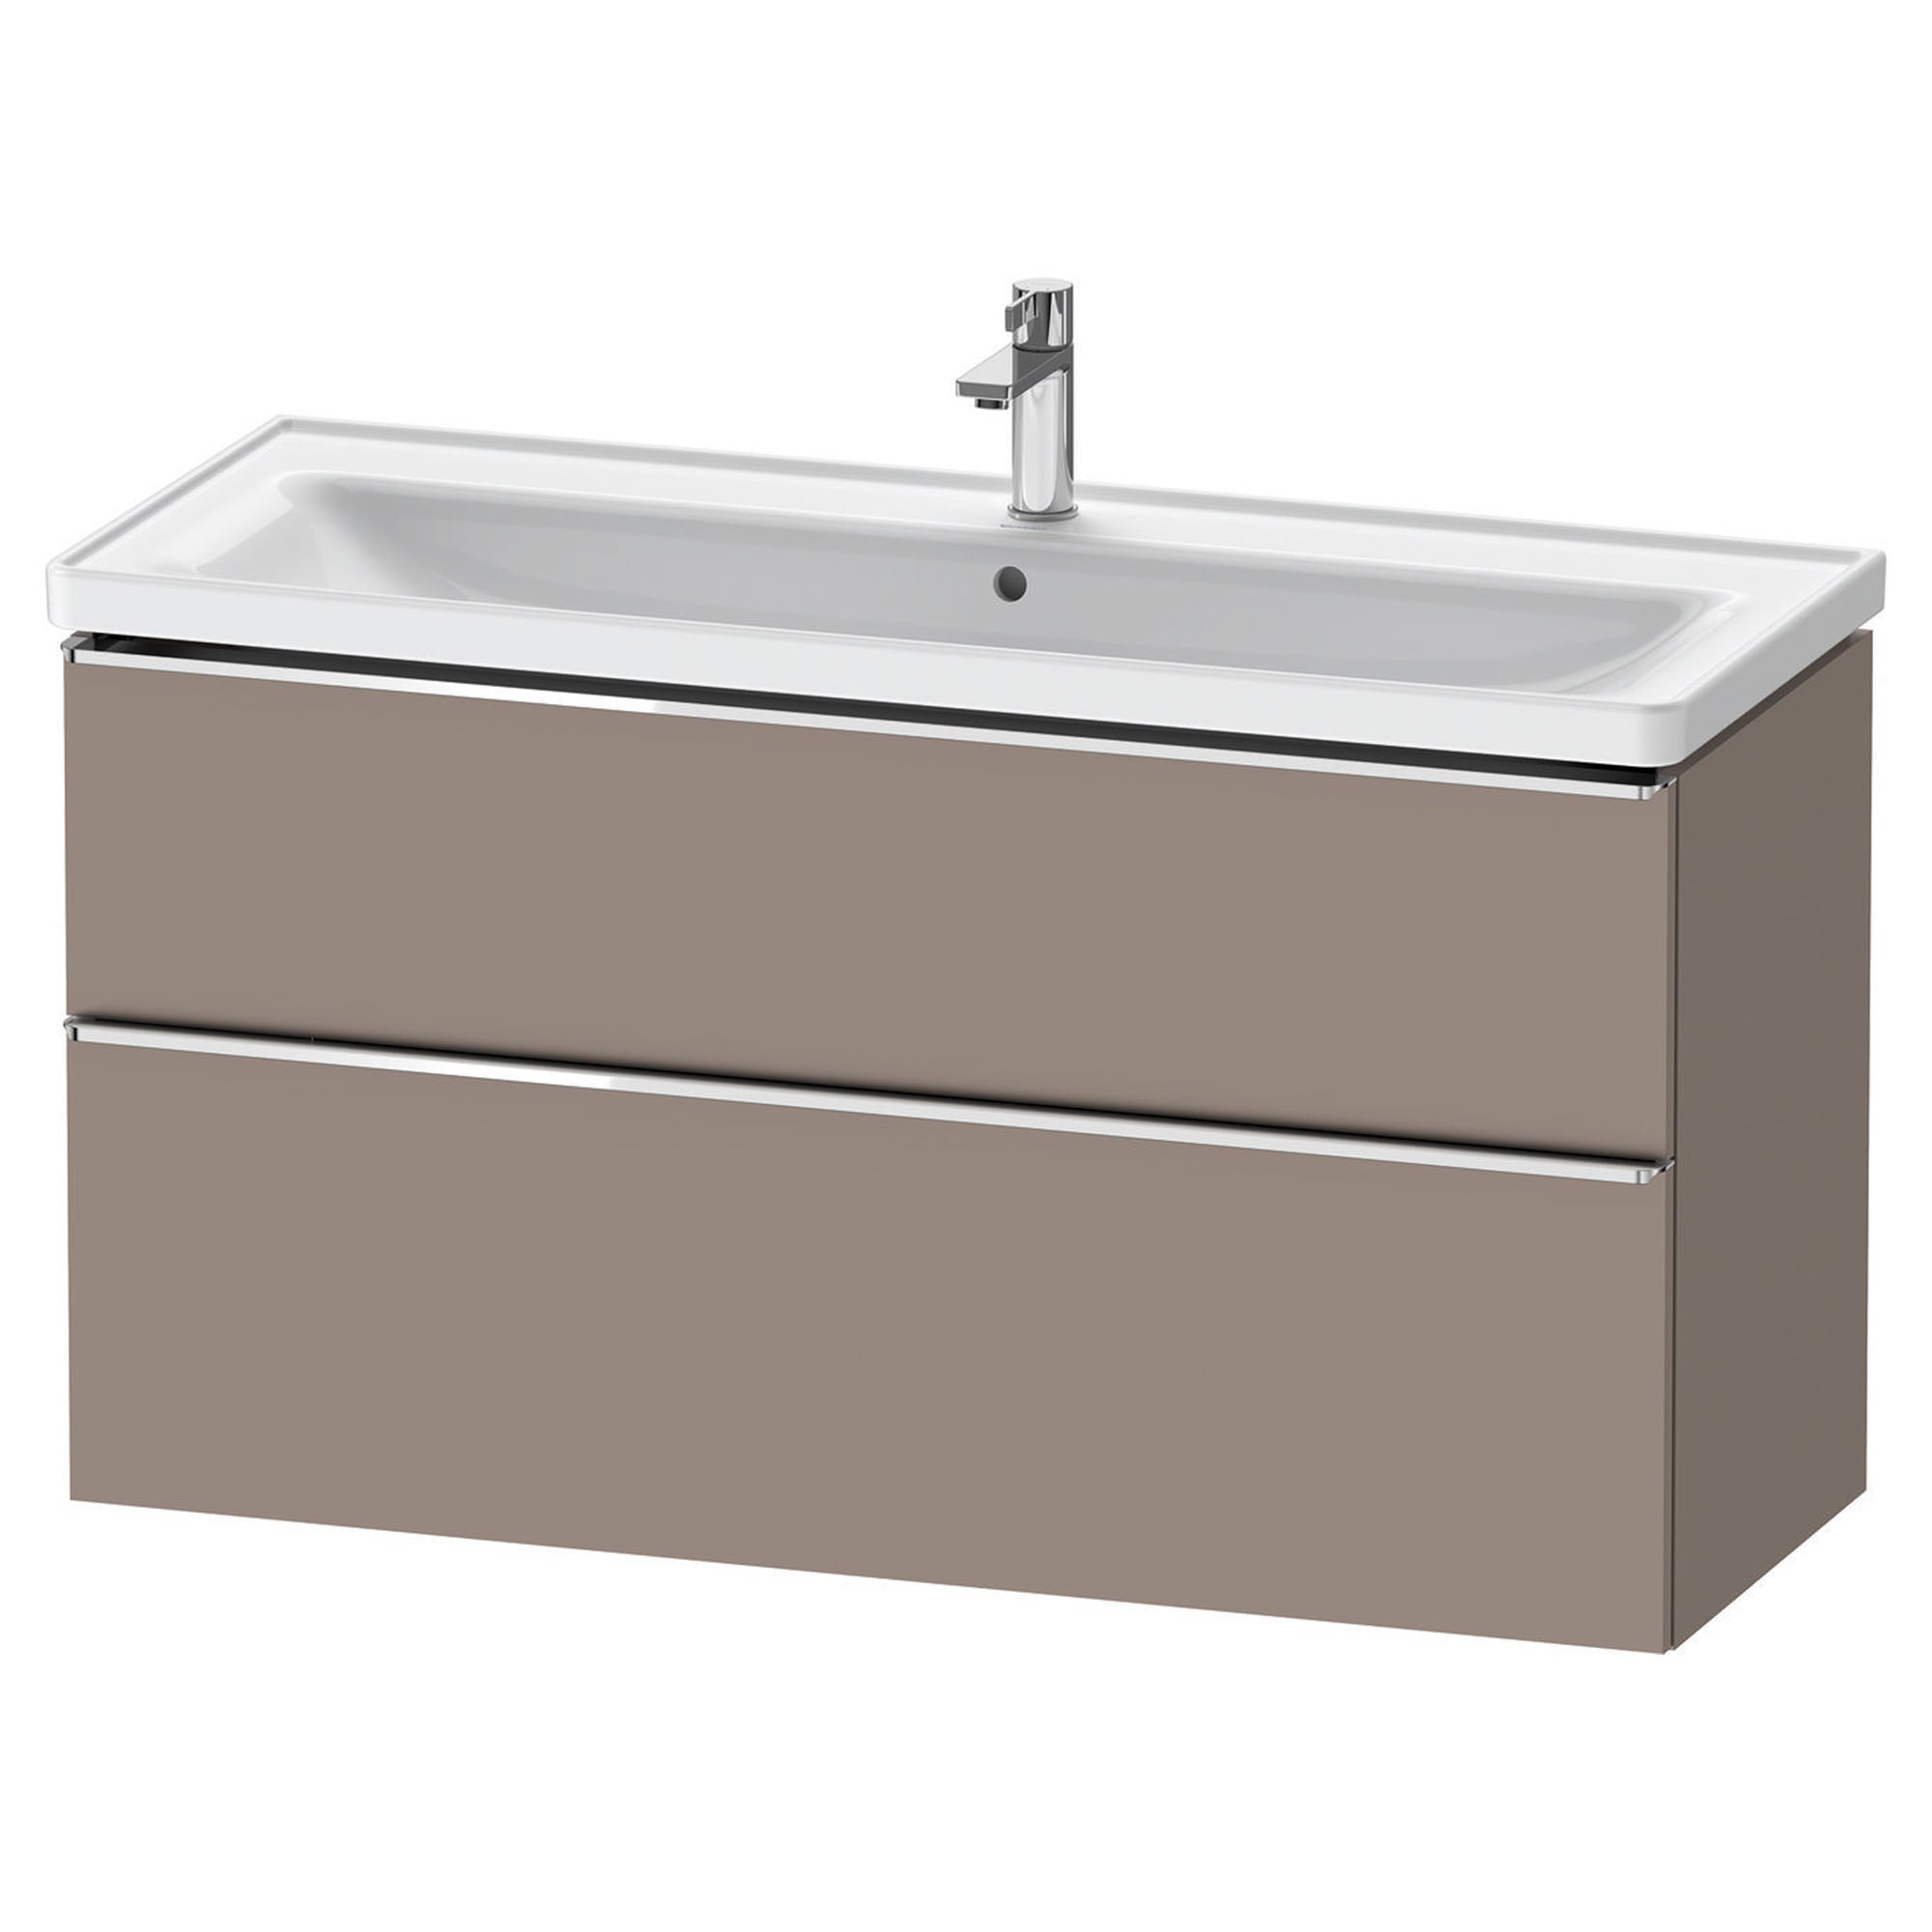 duravit d-neo 1200mm wall mounted vanity unit with d-neo basin basalt chrome handles